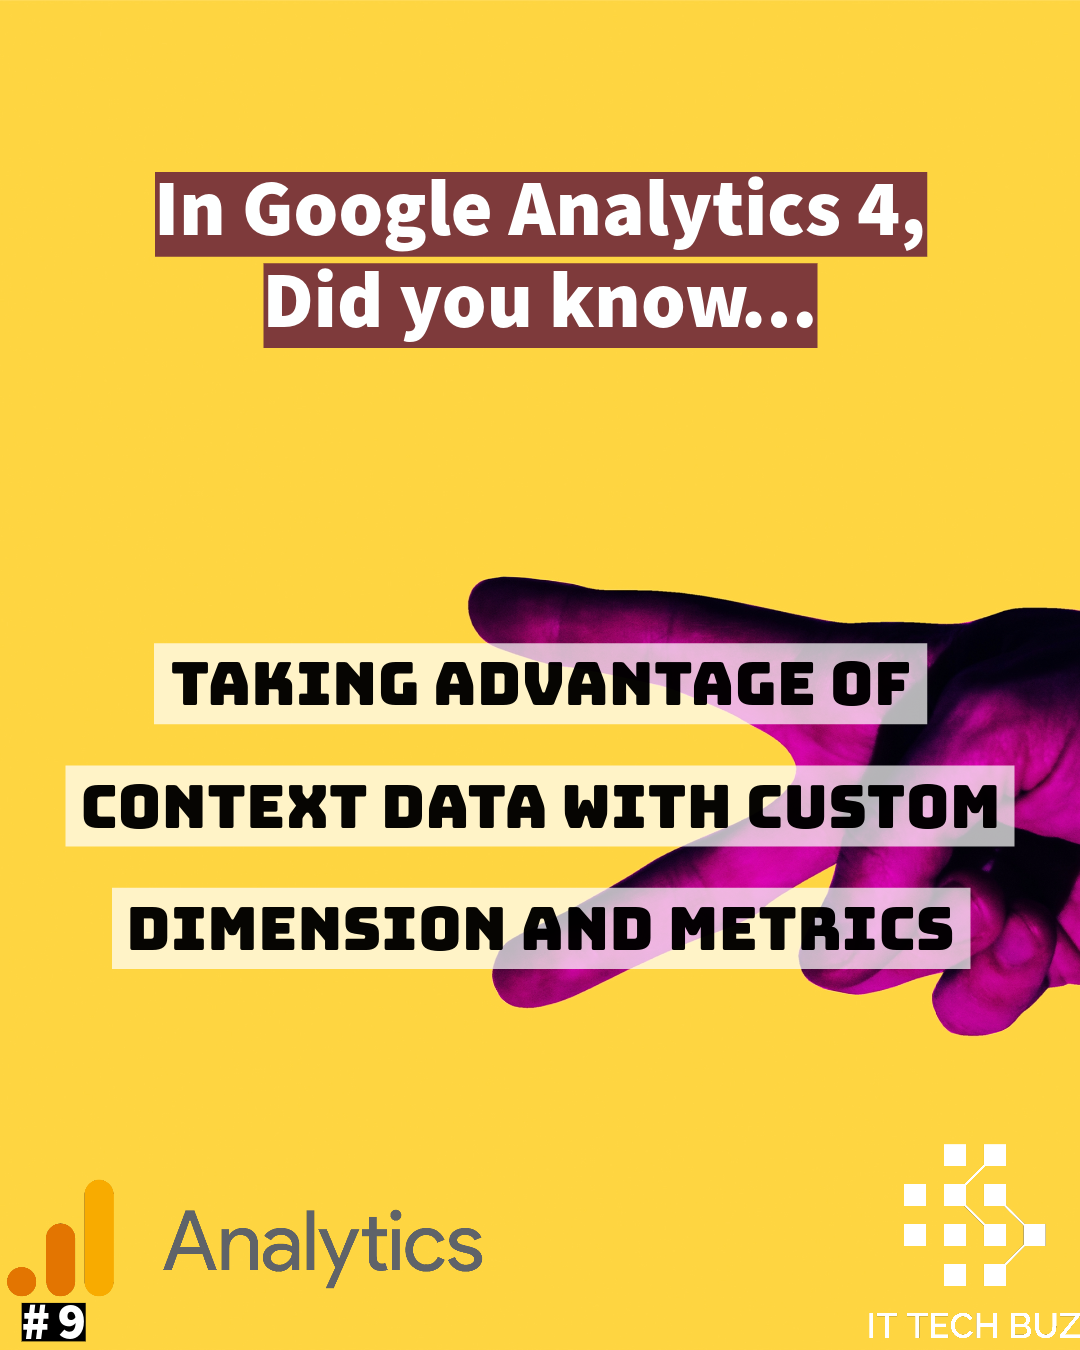 Understand Google Analytics 4: Advantage of Data with Context using Custom Dimensions and Metrics